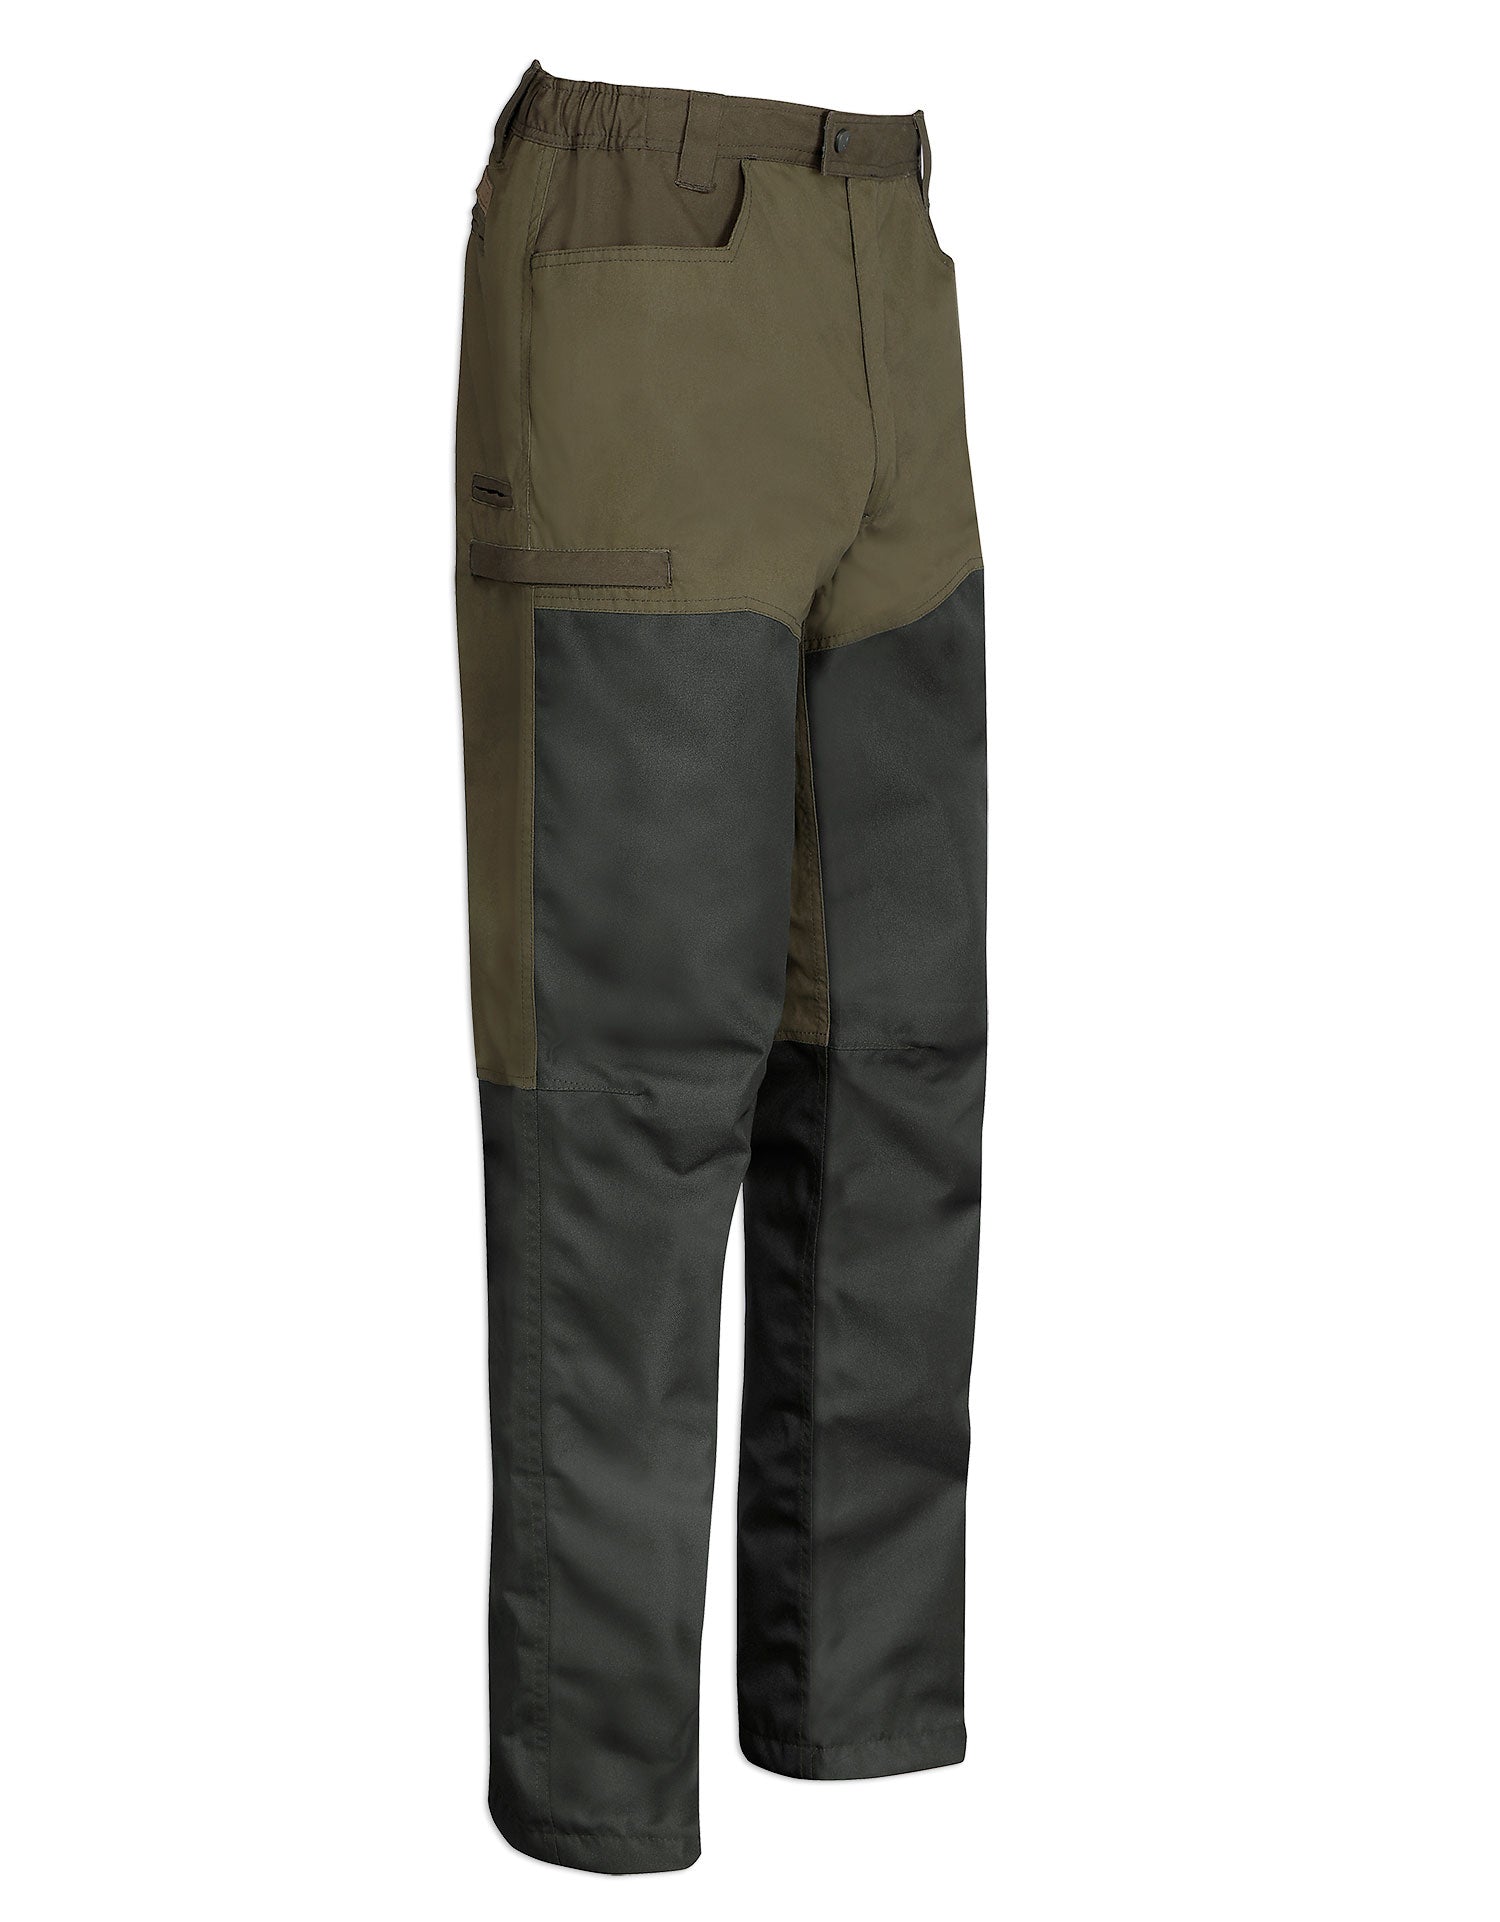 Percussion Renfort Imperlight Reinforced Trousers